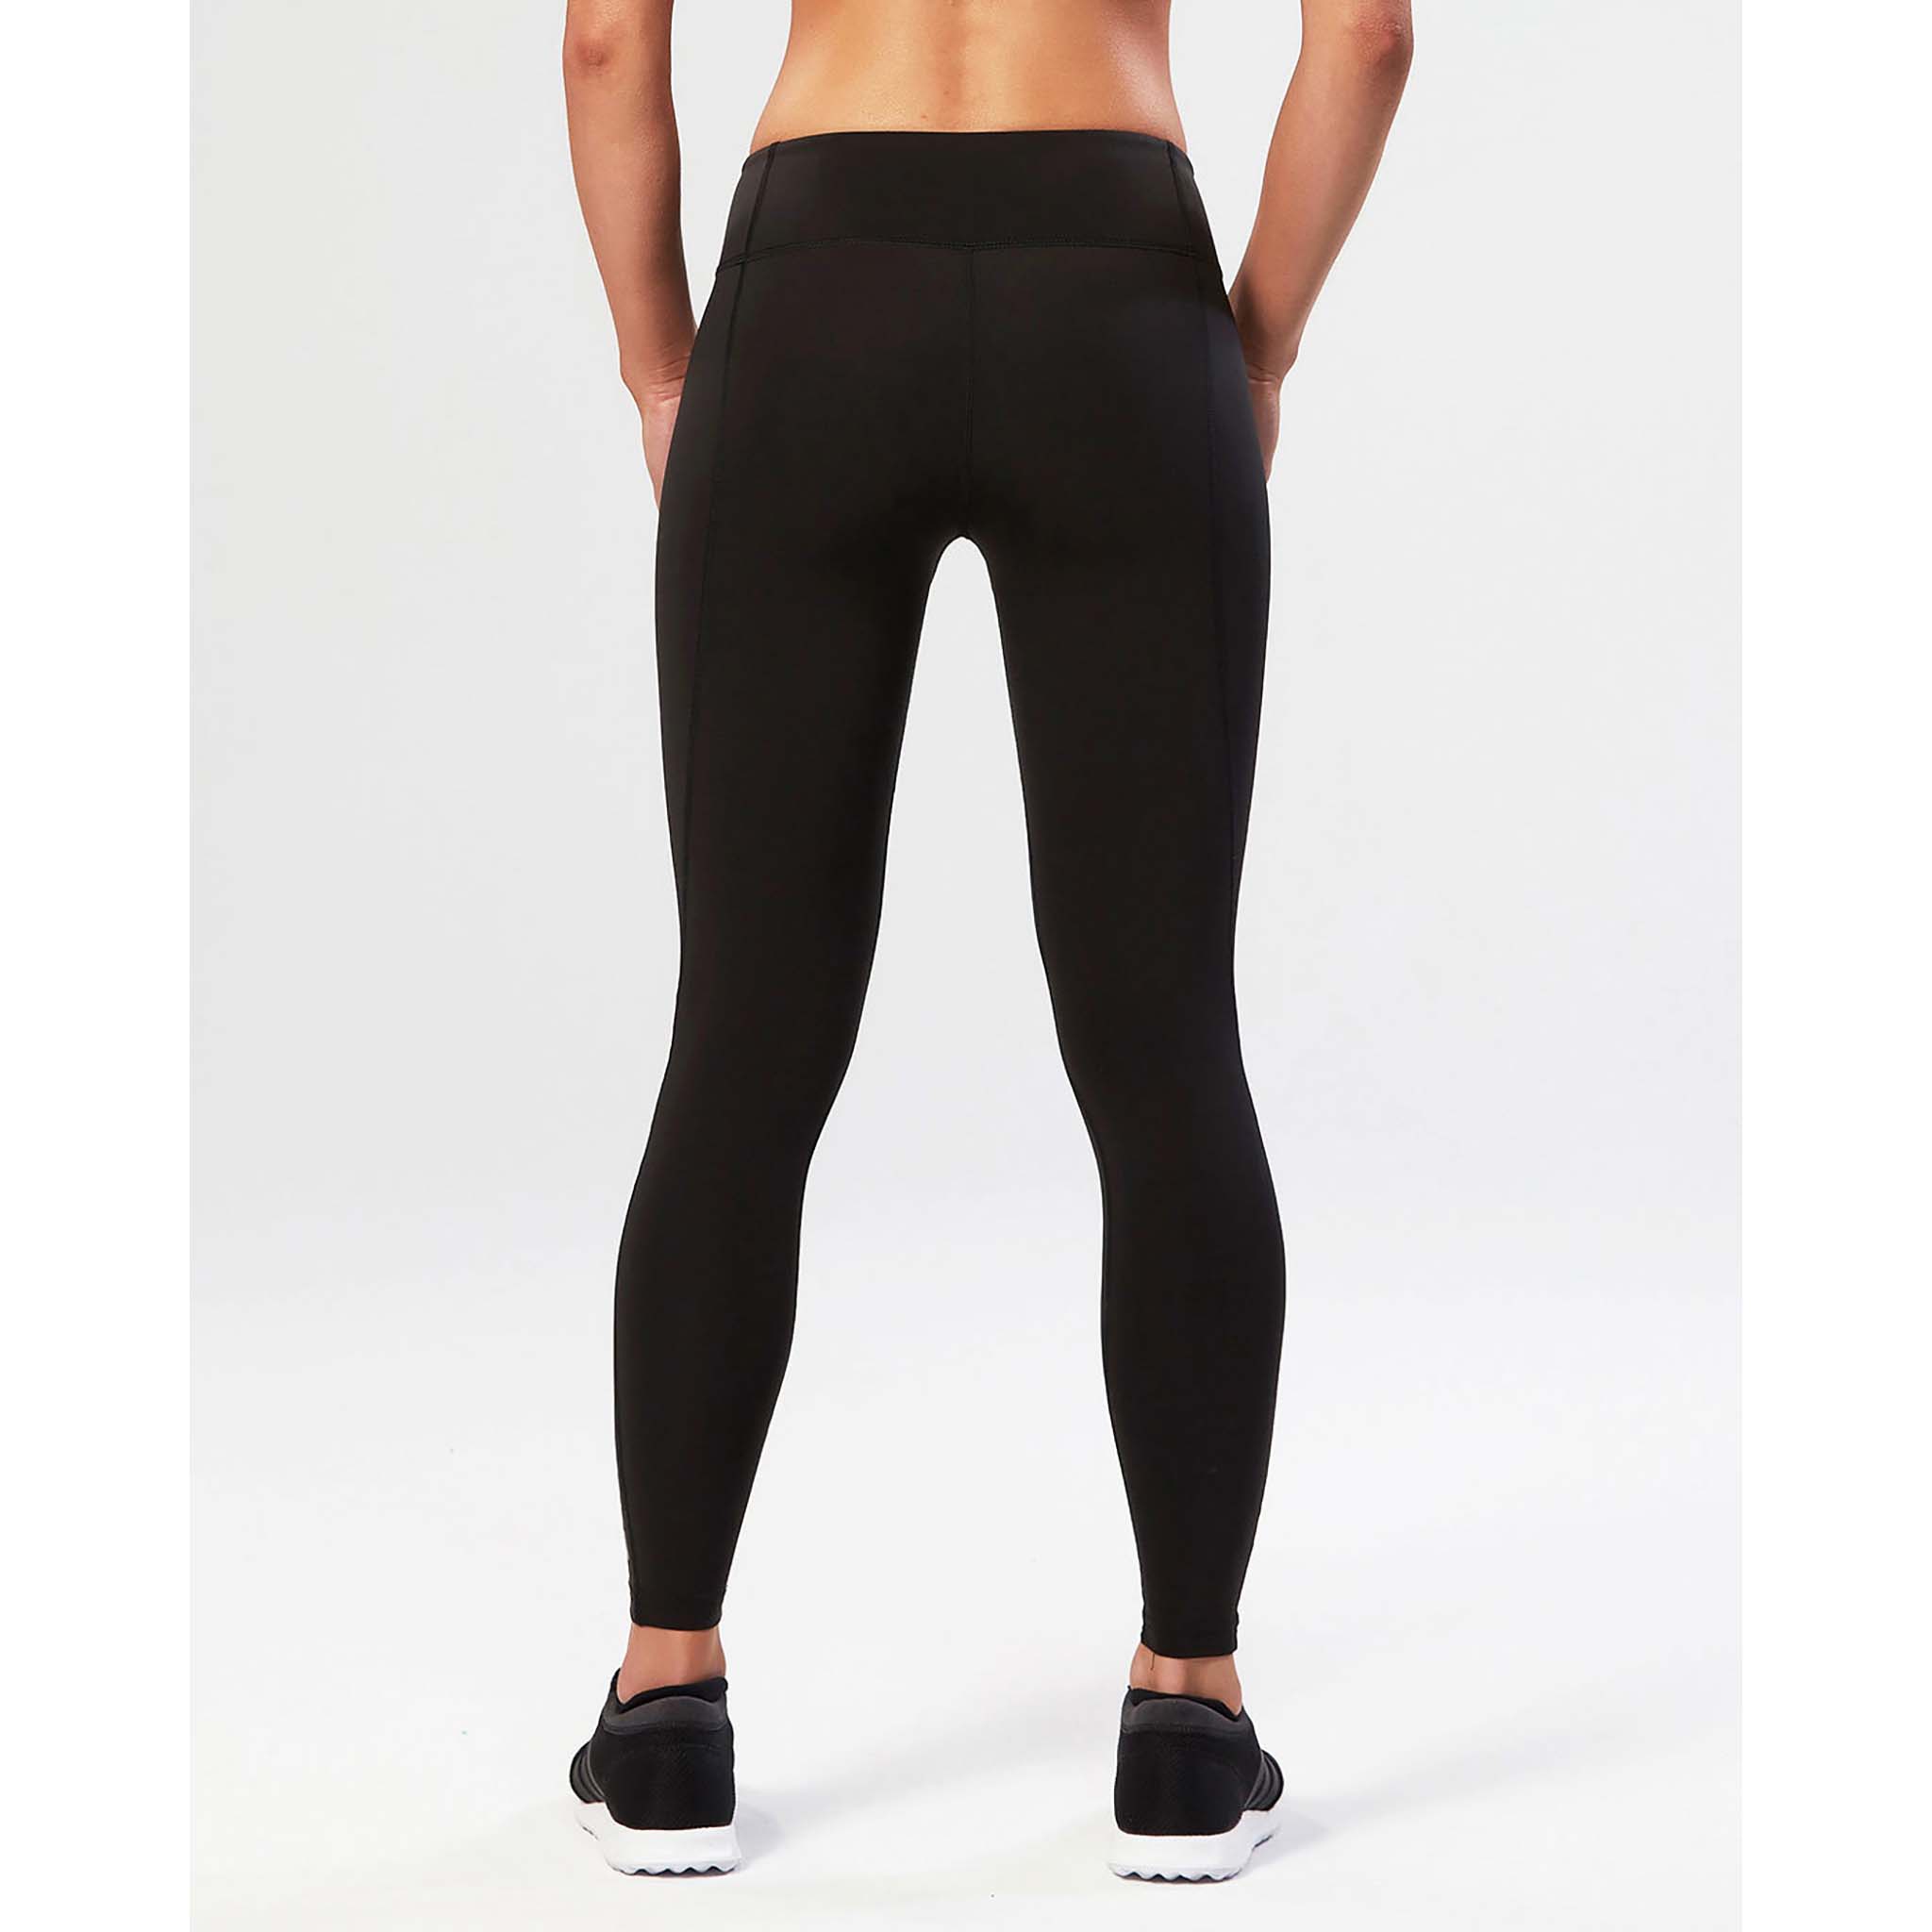 2XU mid-rise compression tights for women